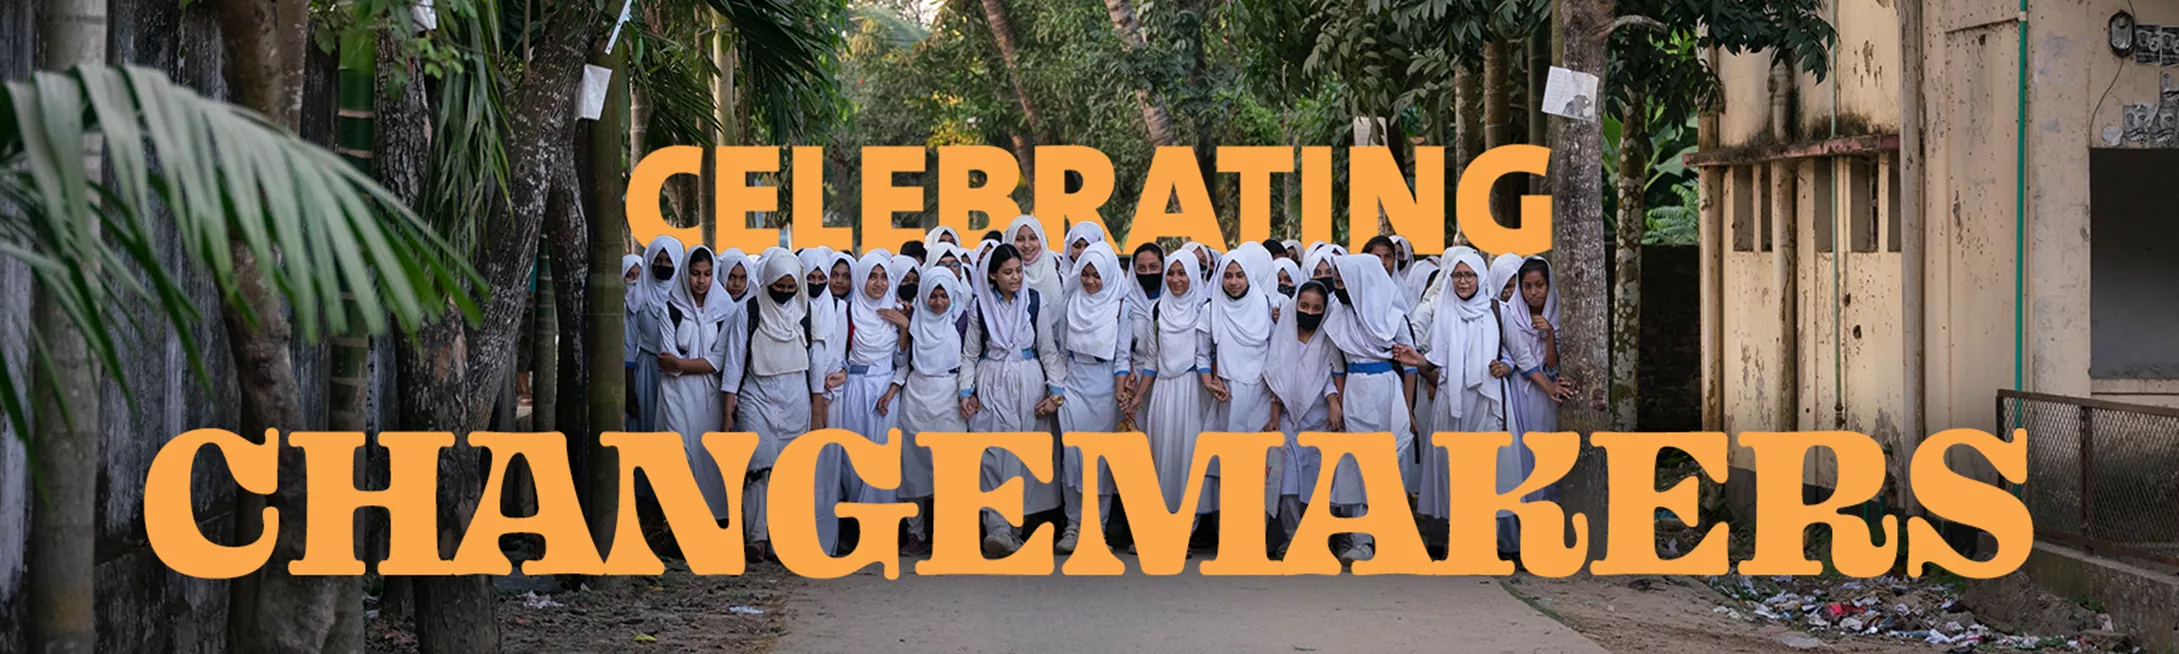 Big group of girls in Bangladesh dressed in white walking outside together surrounded by trees with the words "Celebrating Changemakers" overlaid